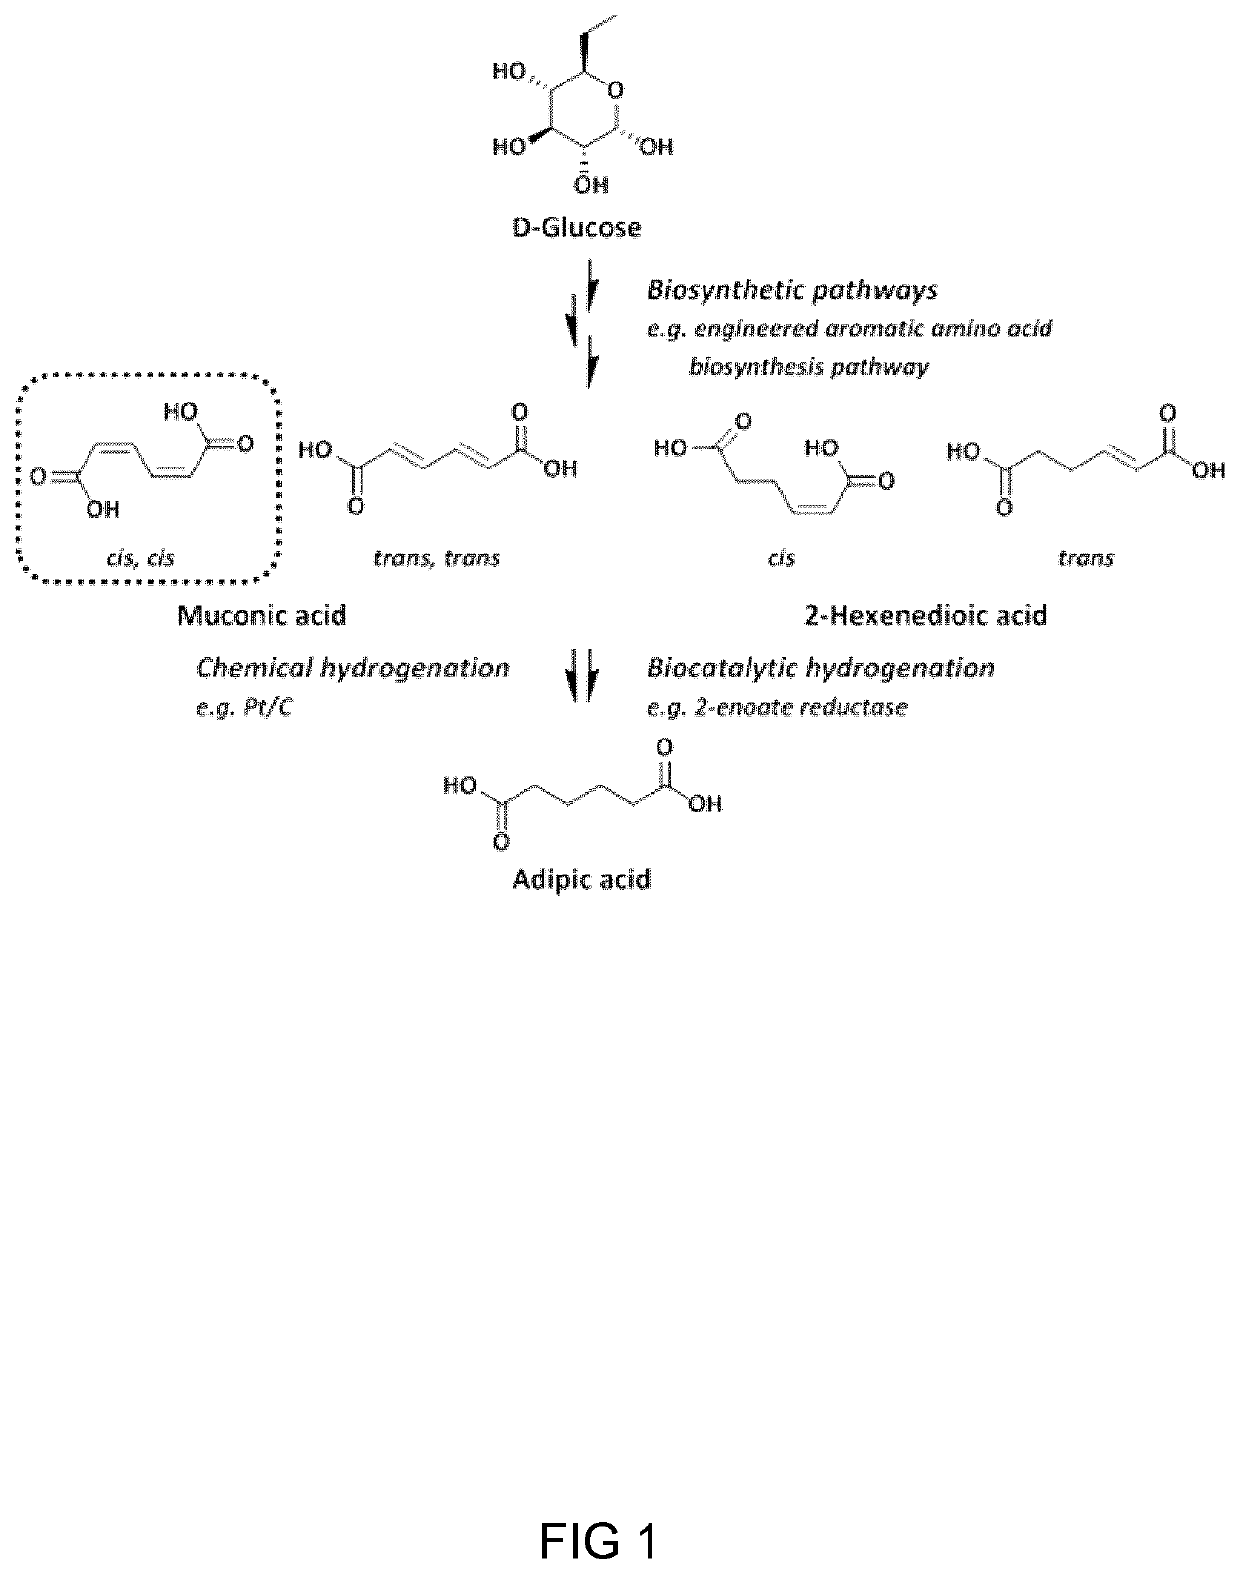 Process And Microorganism For Synthesis Of Adipic Acid From Carboxylic Acids